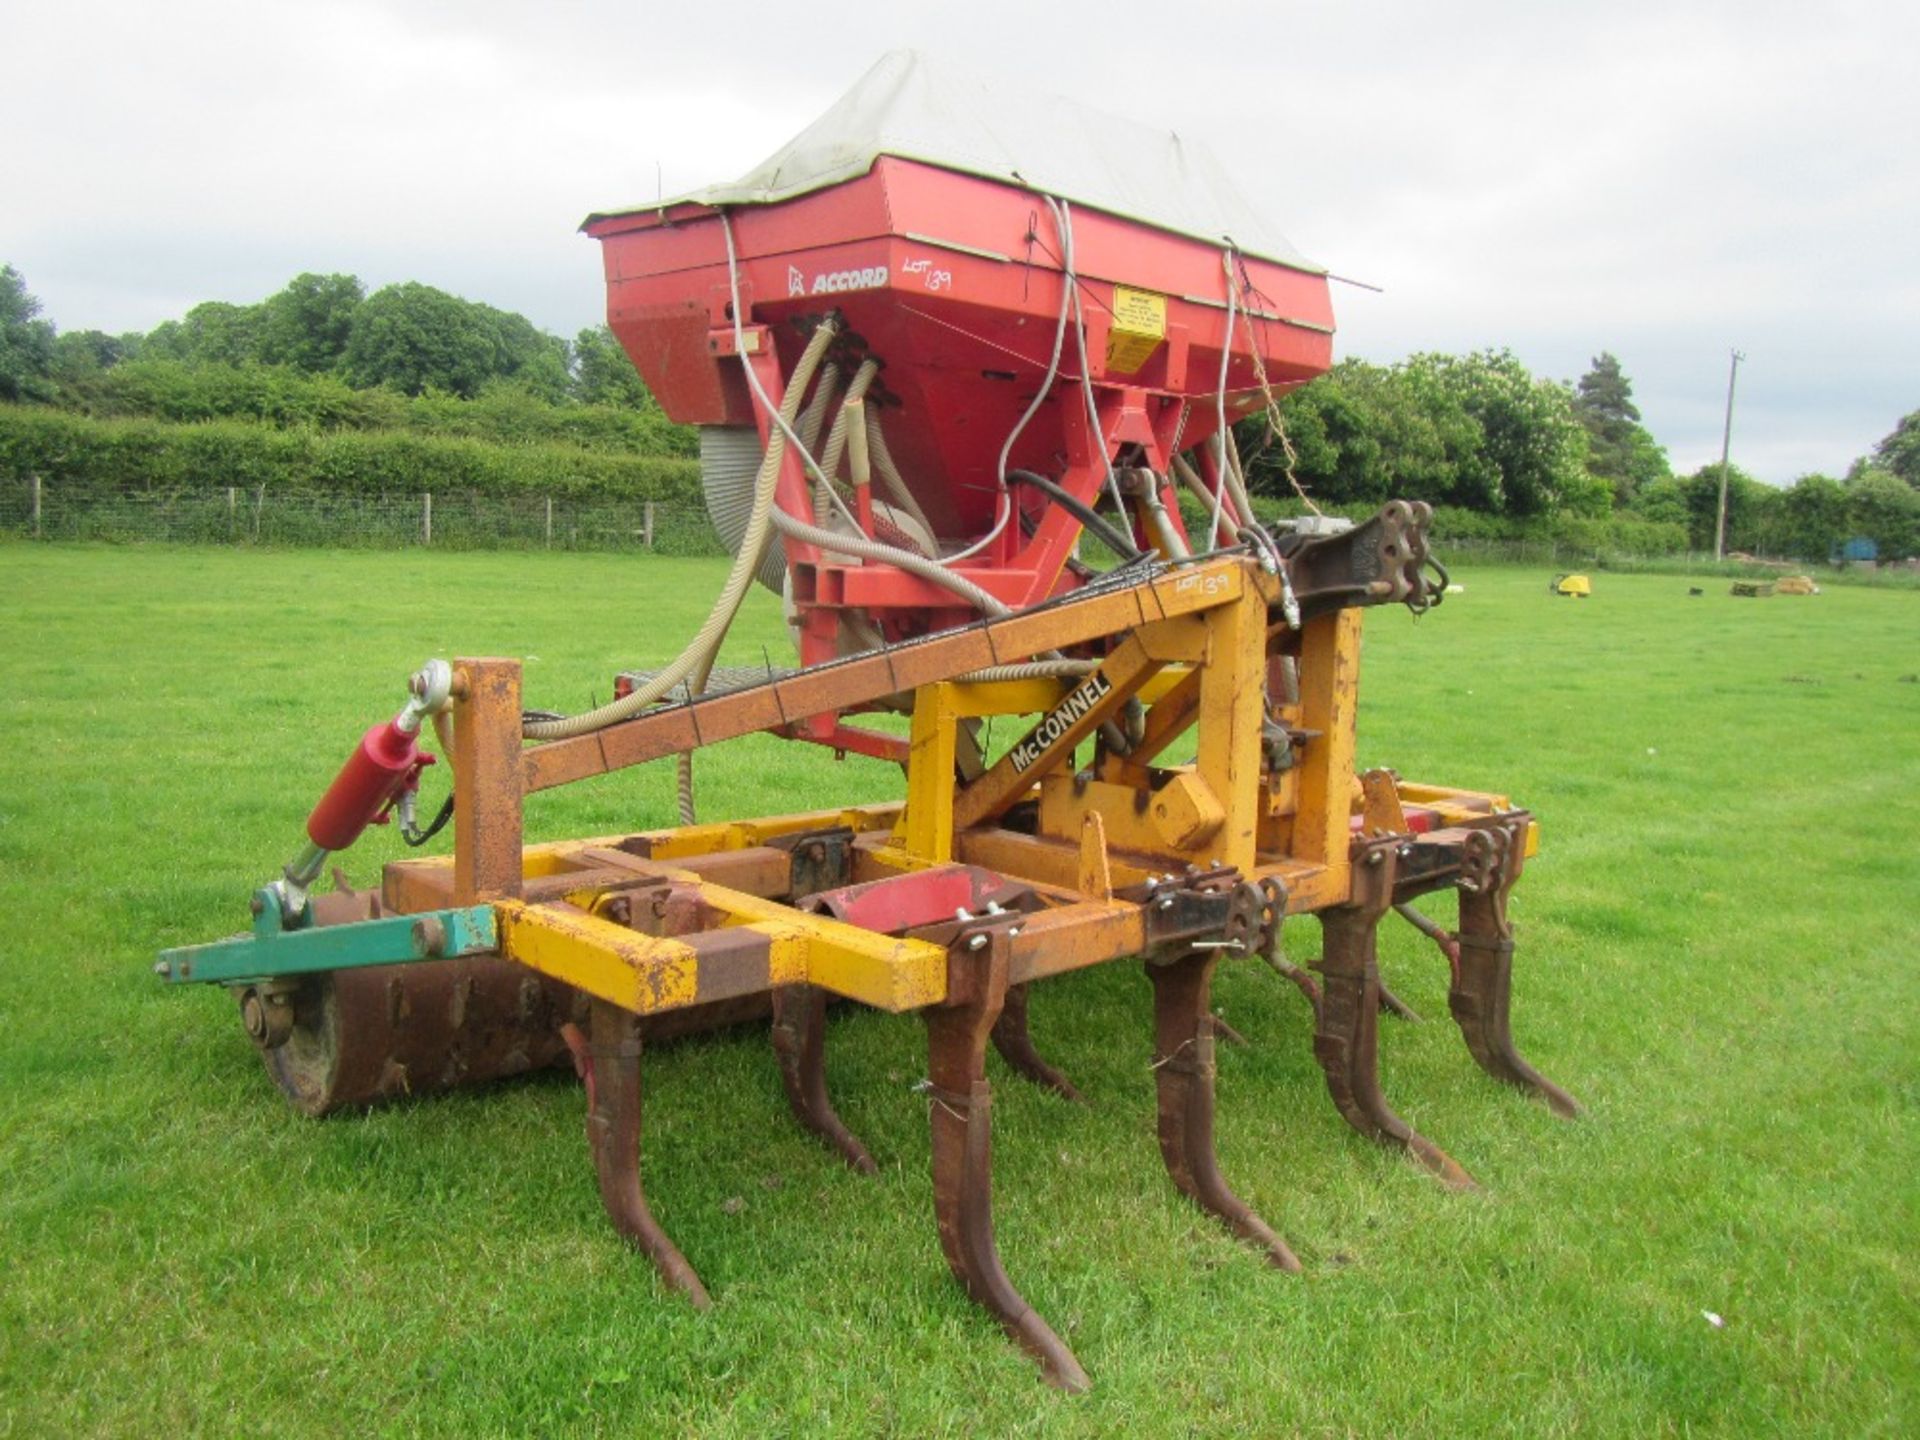 McConnel Shakaerator 9leg cultivator with hydraulic packer roller and Accord bean hopper/drill